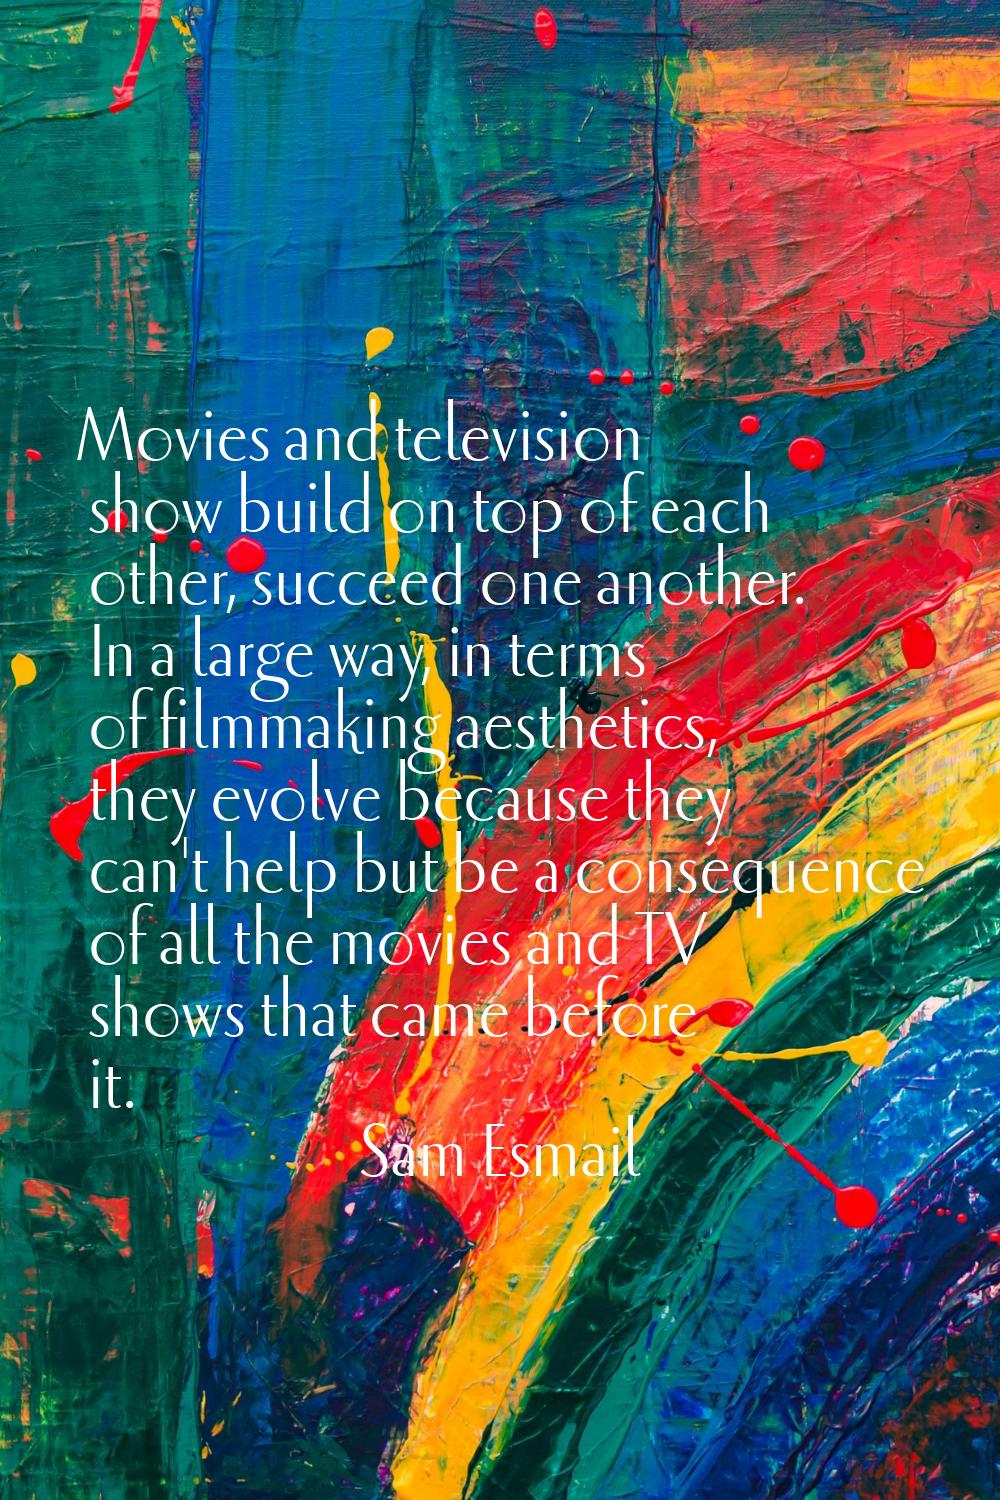 Movies and television show build on top of each other, succeed one another. In a large way, in term